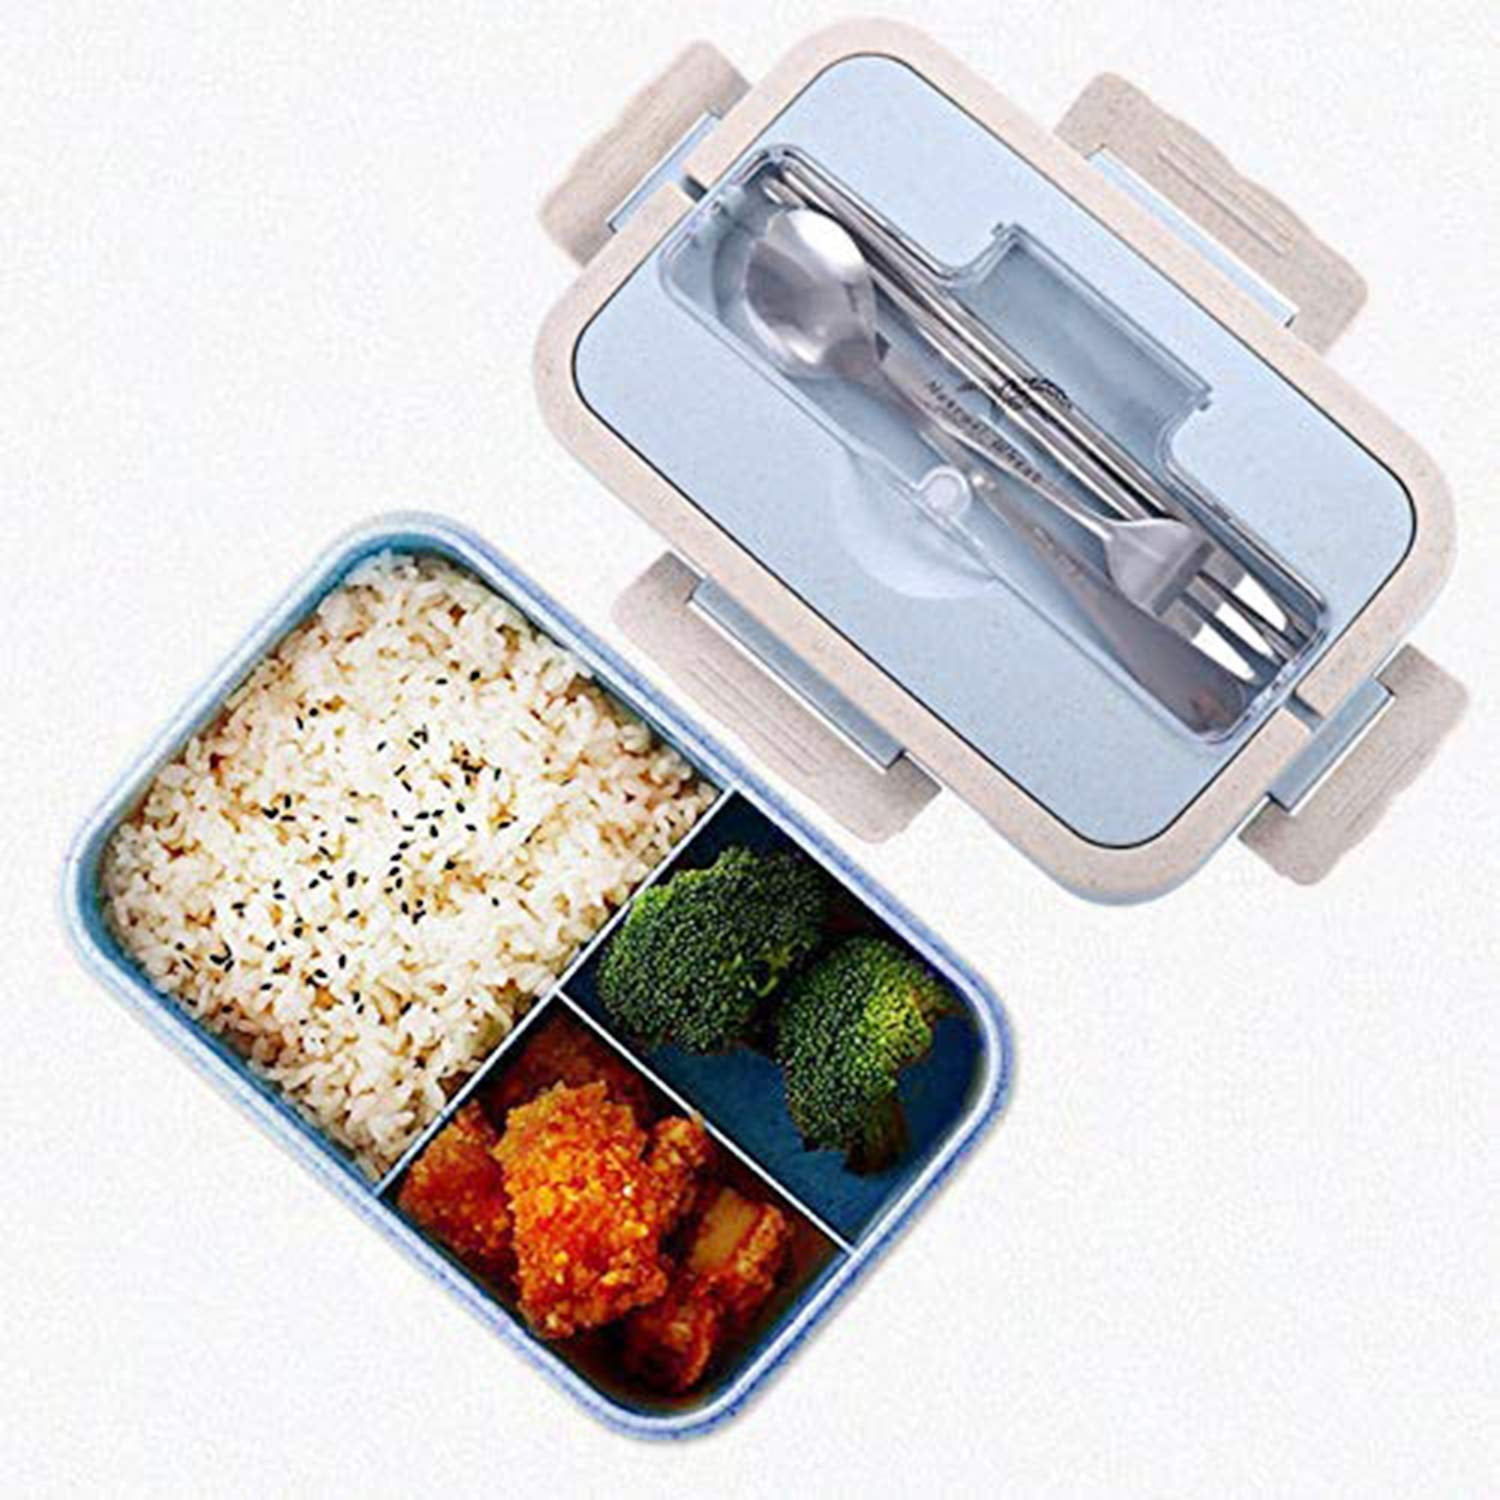 Kitwin Bento Lunch Box for Kids Adults, Reusable Food Container with 3 Compartments and Spoon & Fork, Portable Lunch Container Microwave Safe for Work